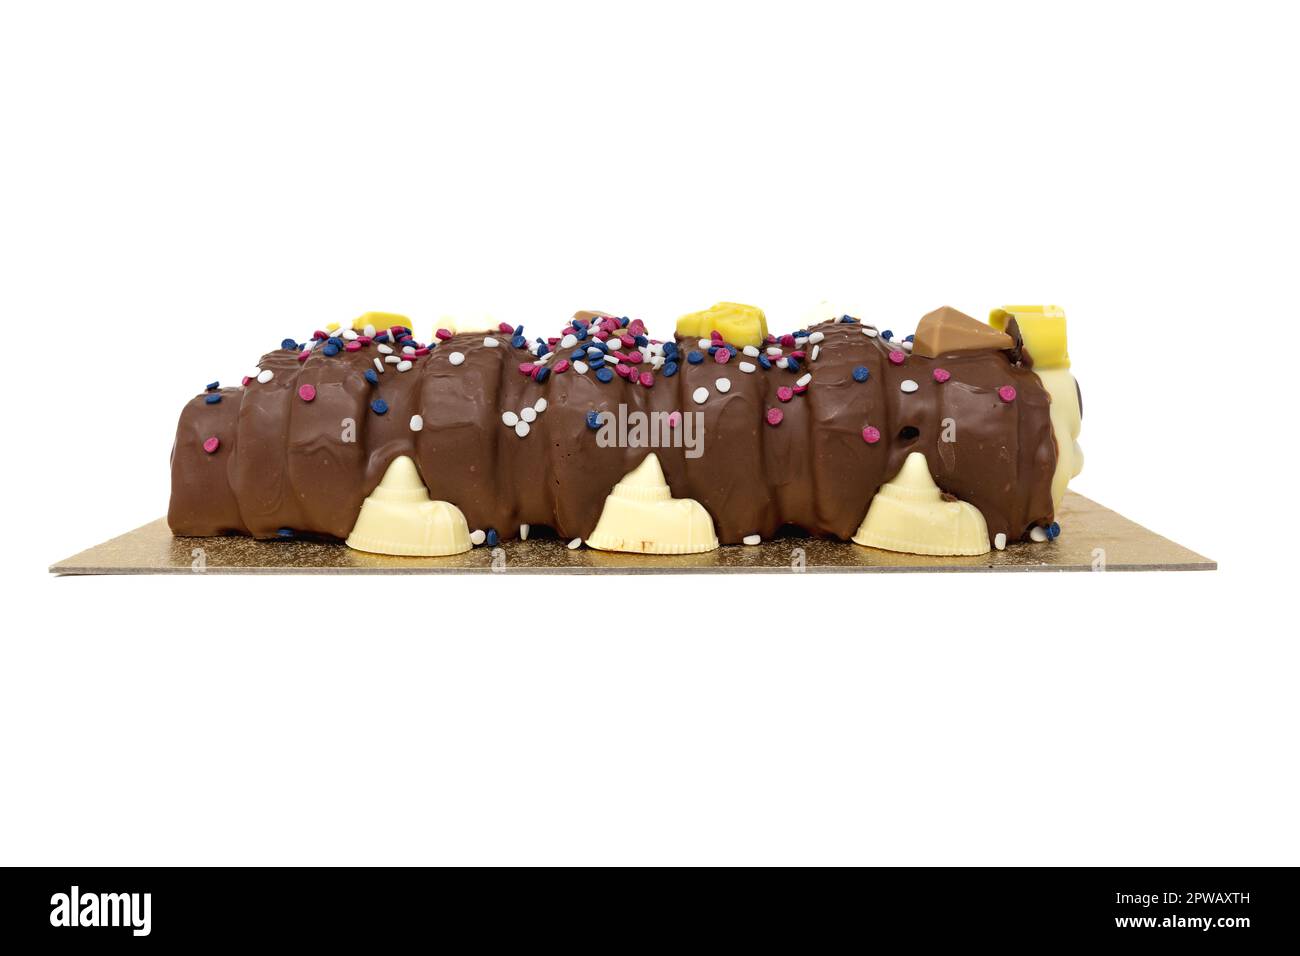 M&S Coronation Colin The Caterpillar Cake Banque D'Images